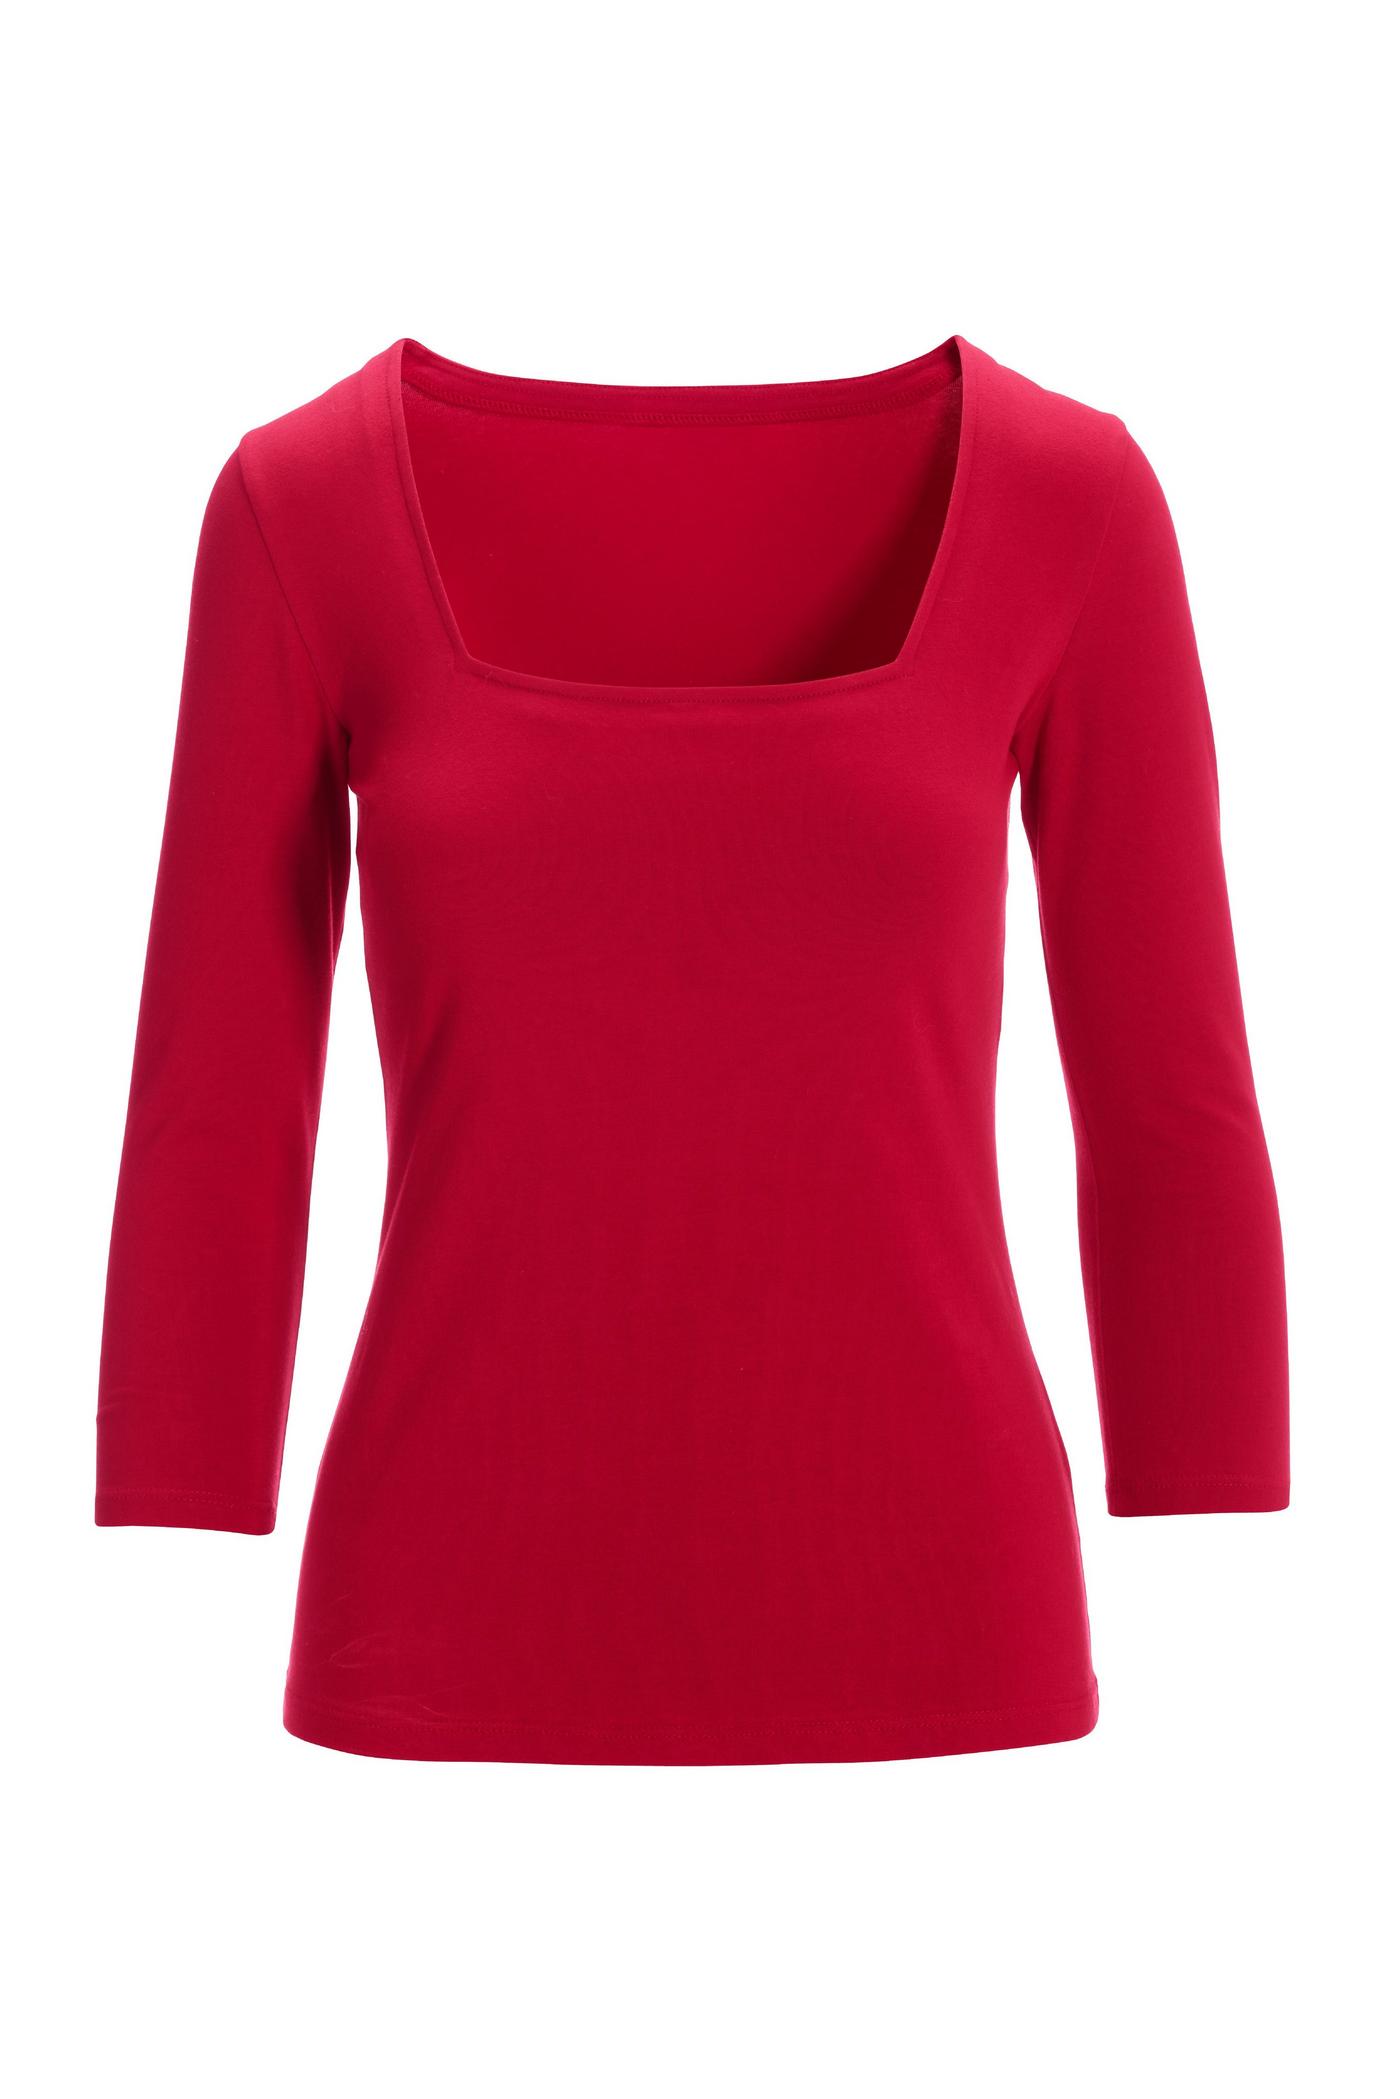 So Sexy Square-Neck Top Red